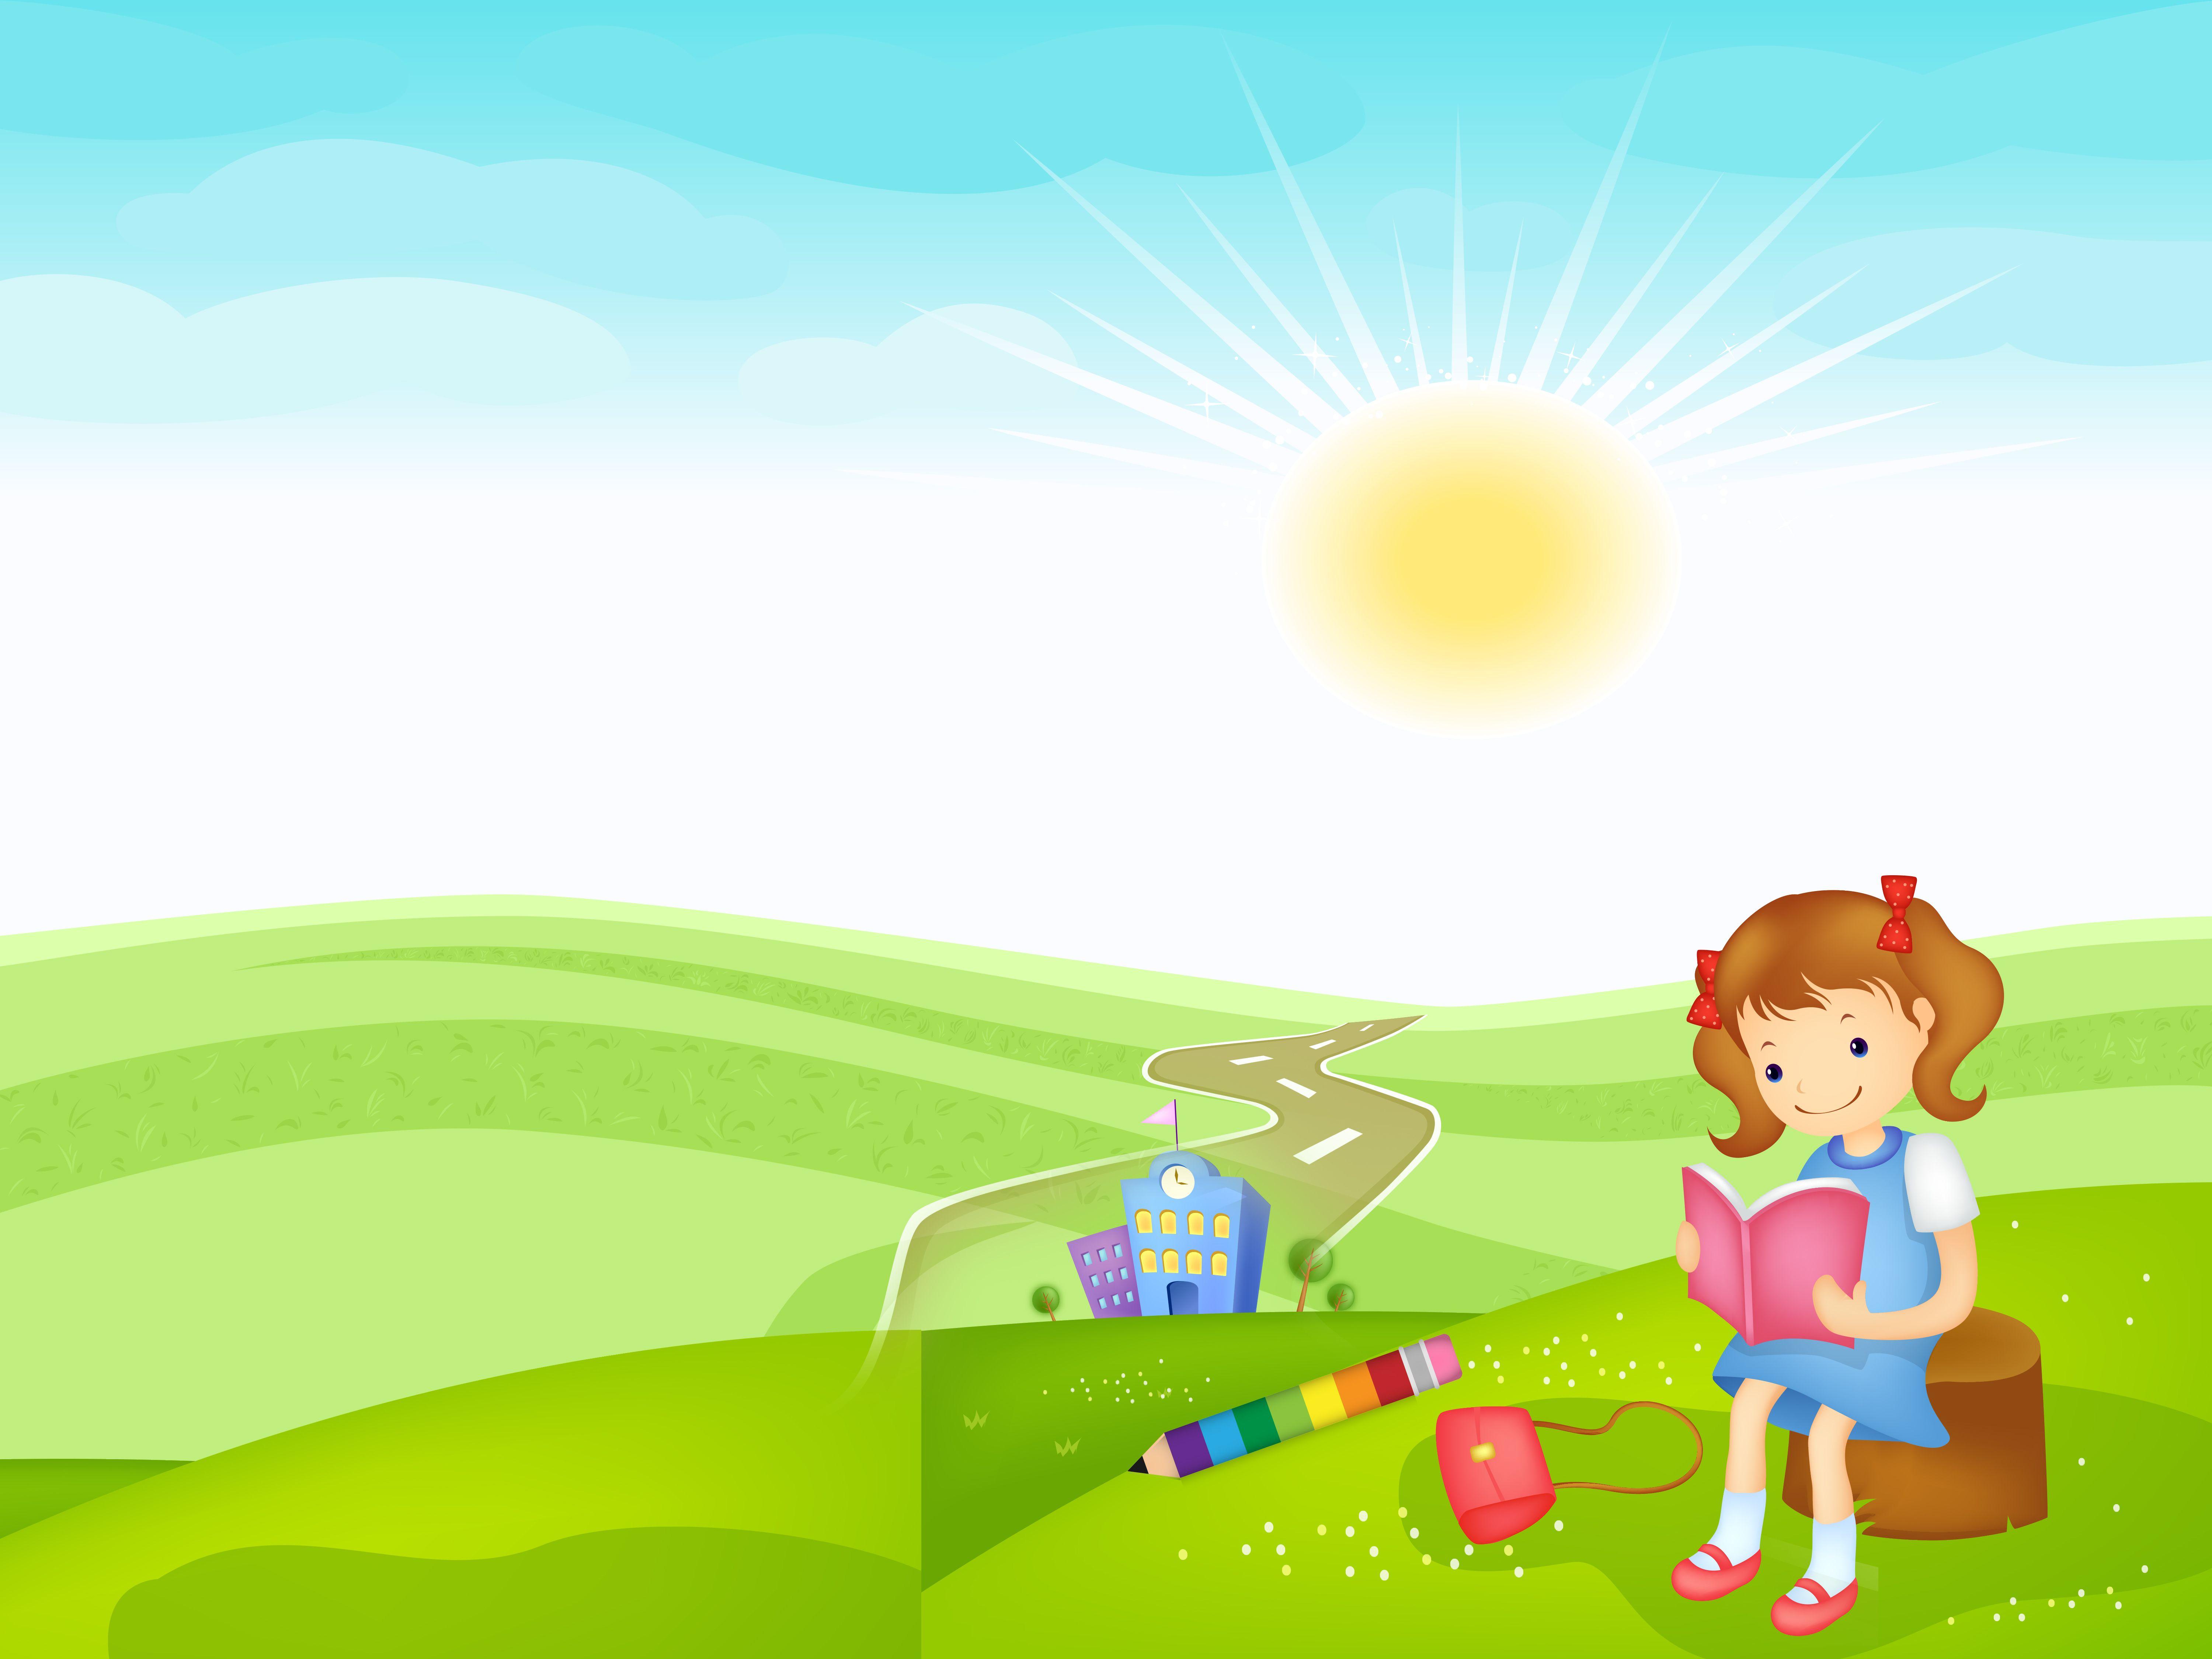 Student reading a book in sunny day wallpaper. Kids wallpaper